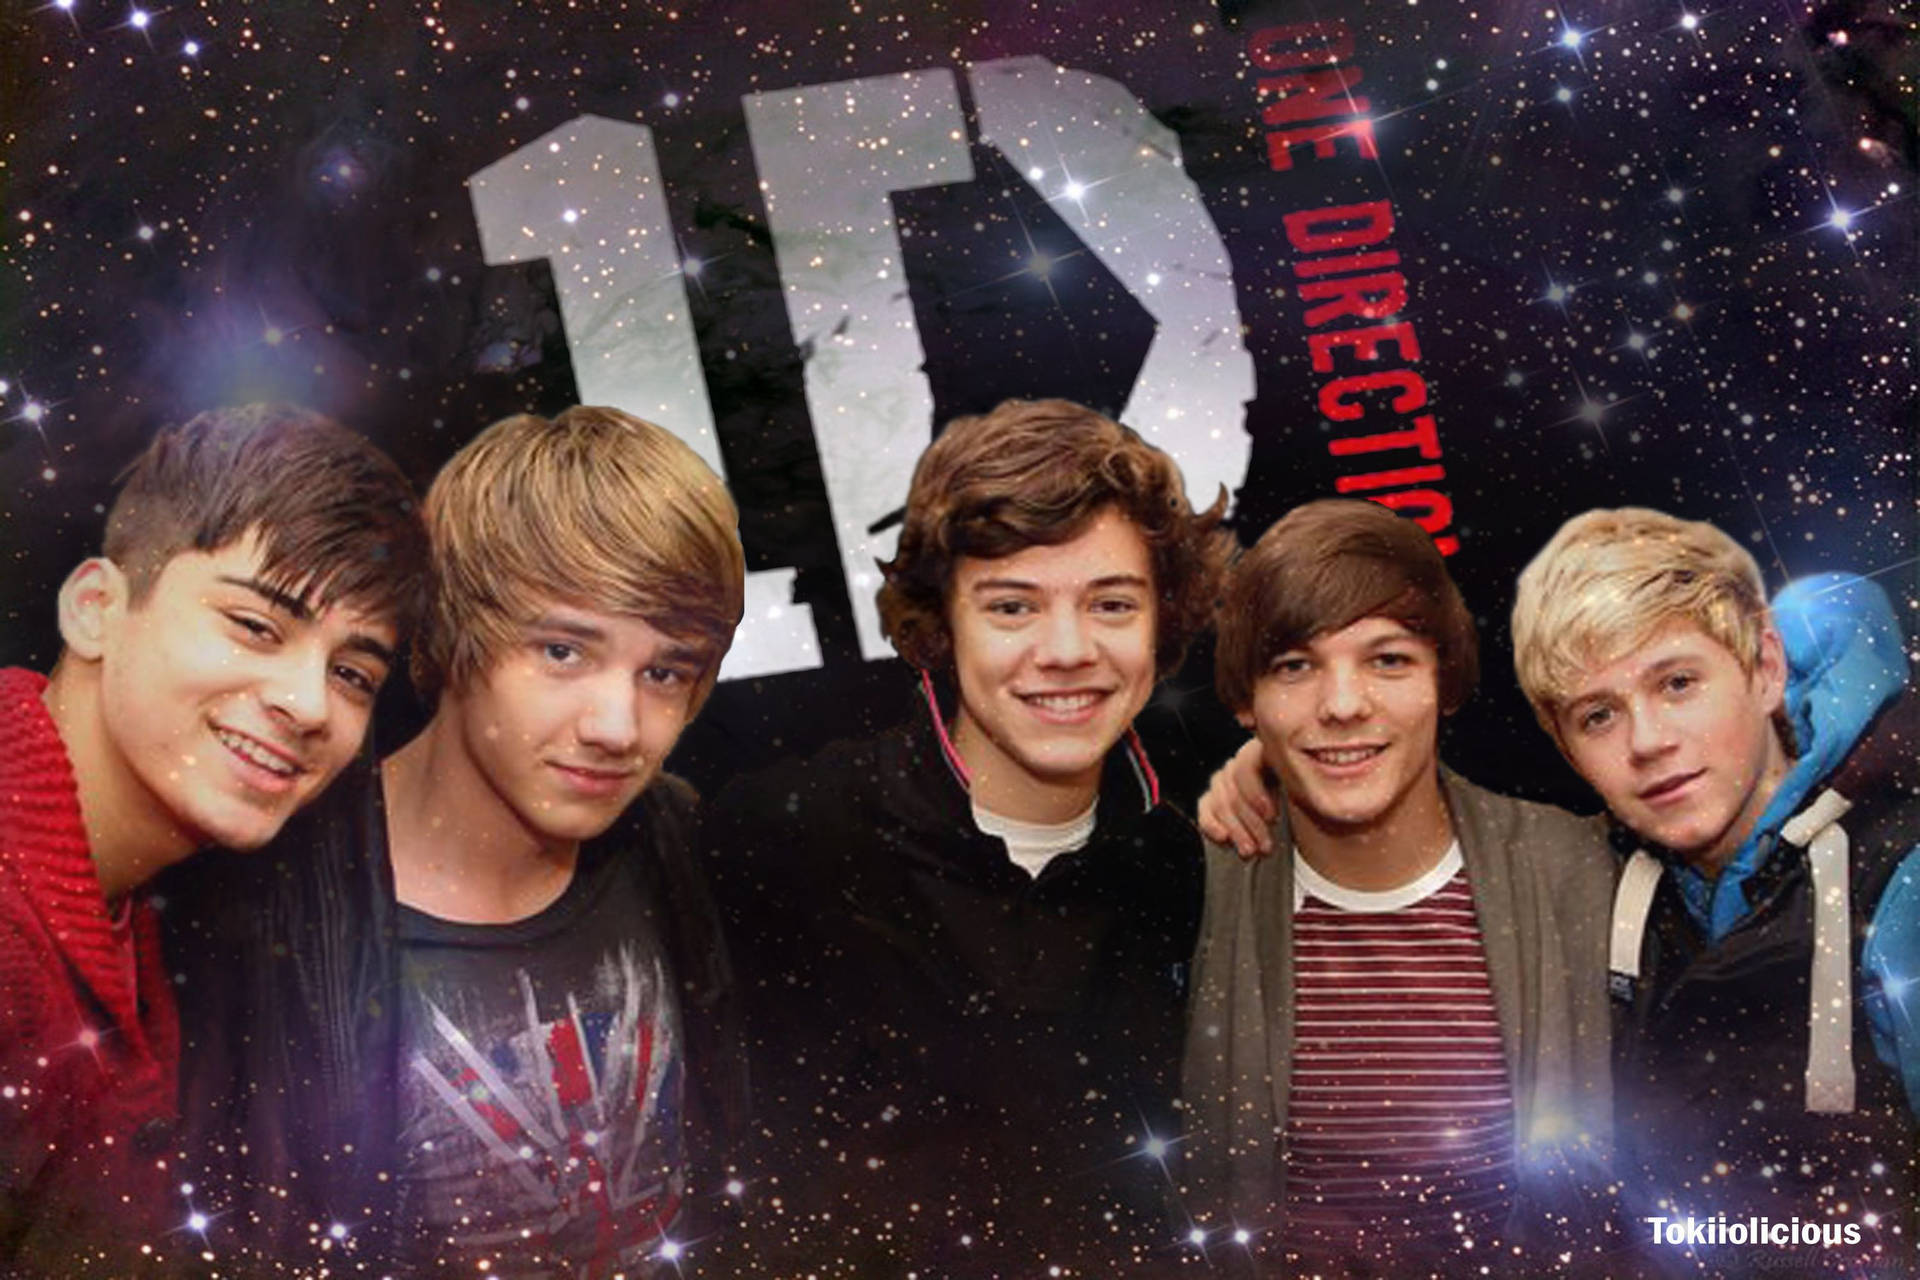 Smiling Youthful One Direction